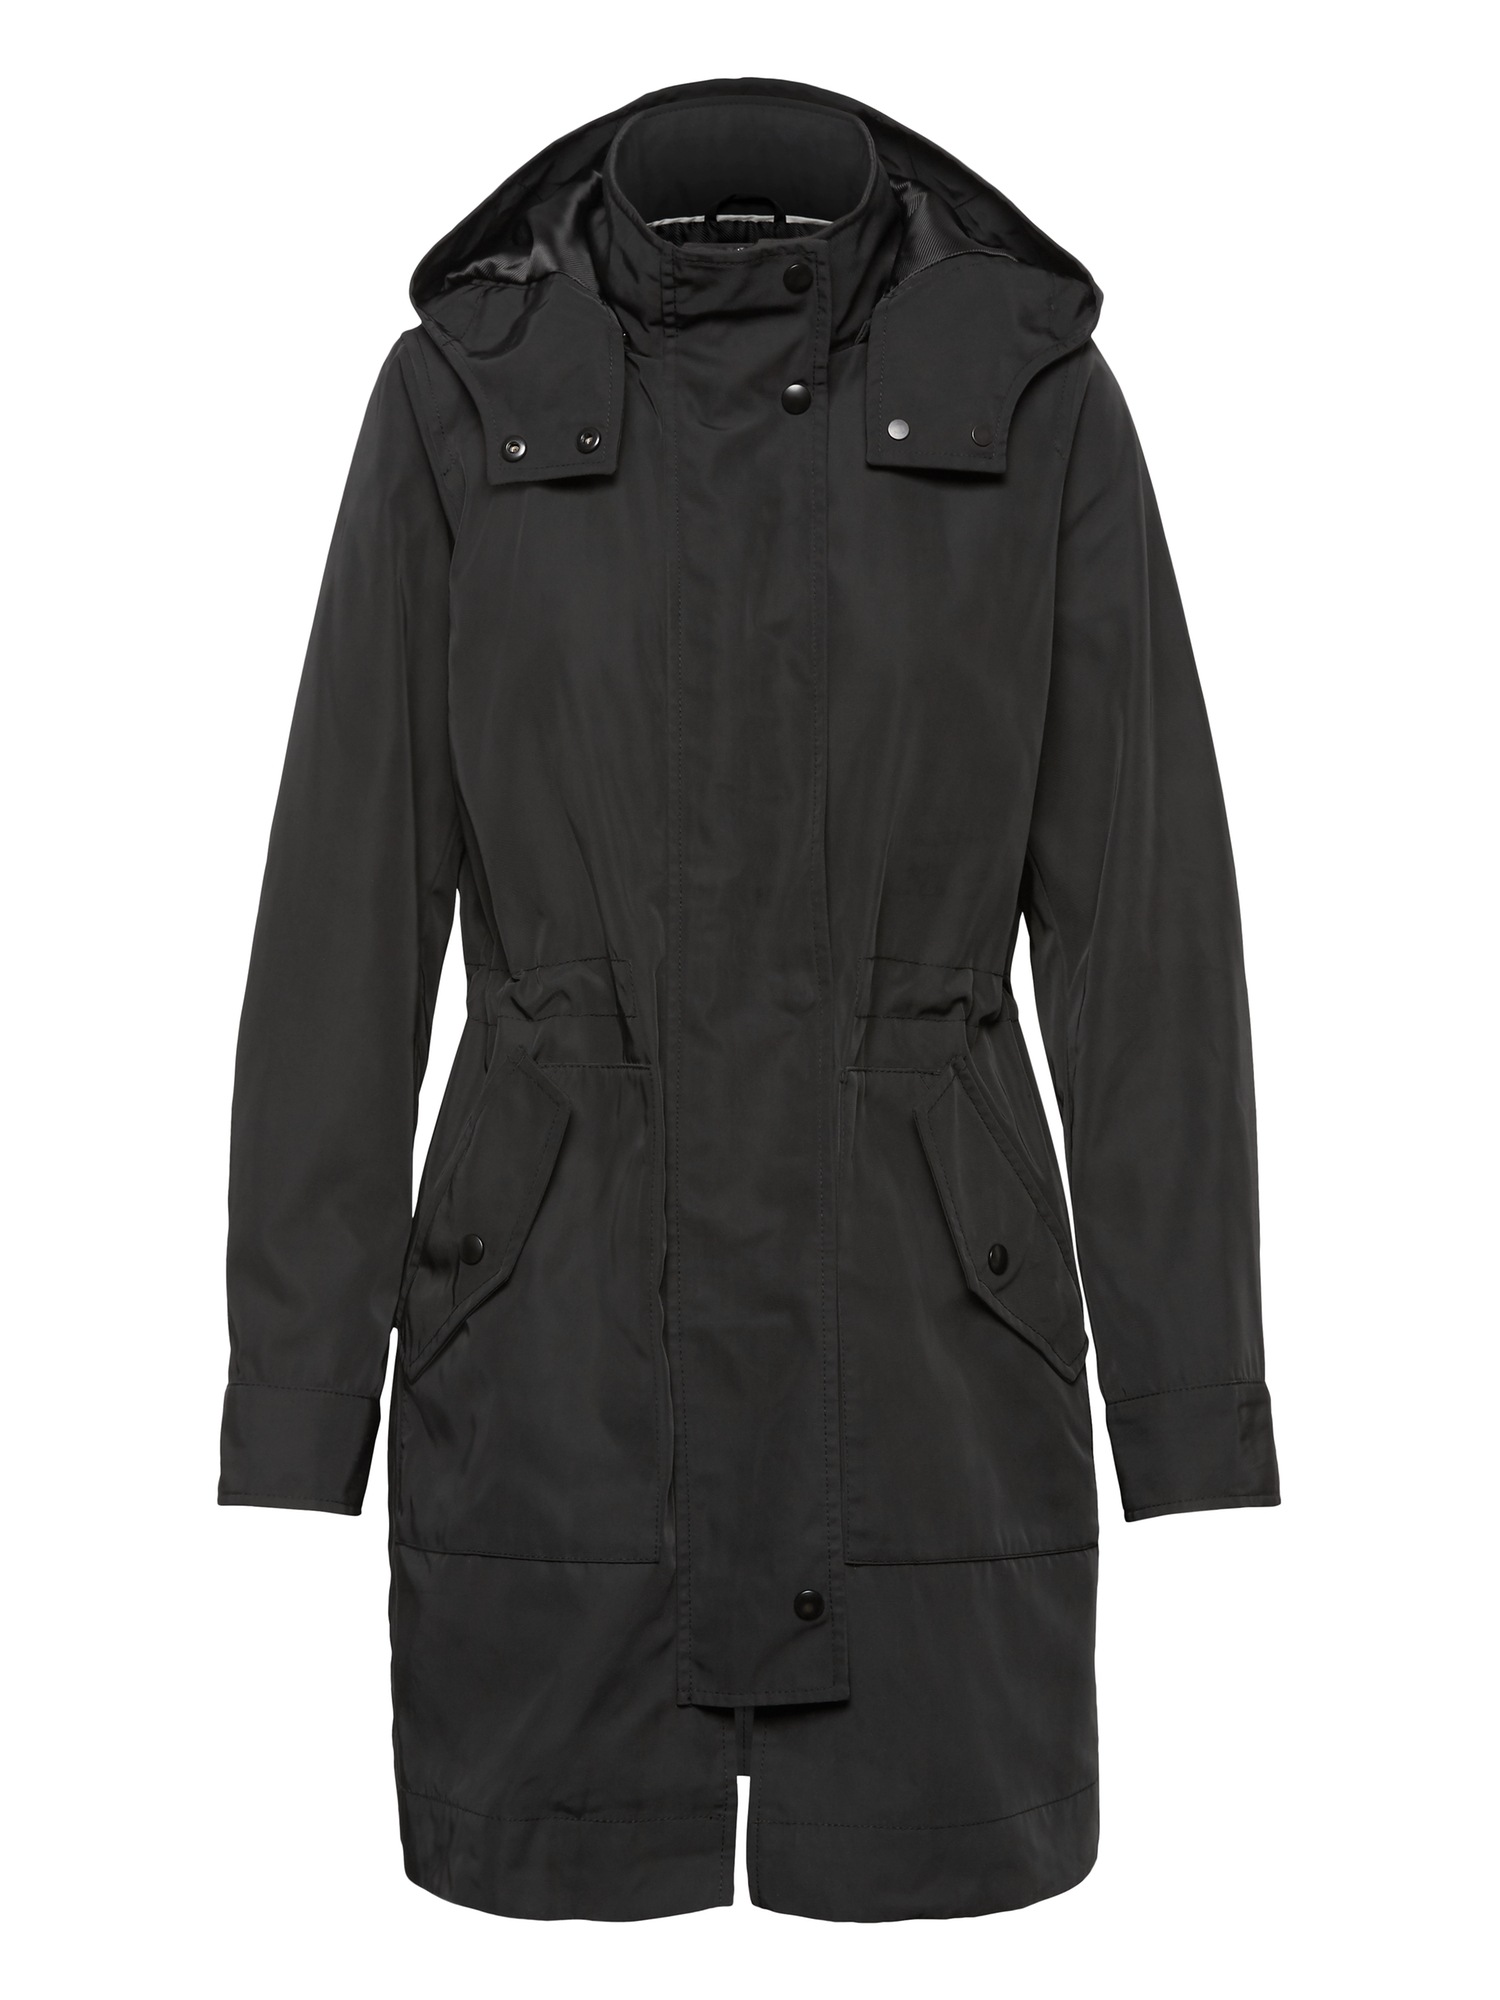 Lightweight Anorak with Removable Hood | Banana Republic